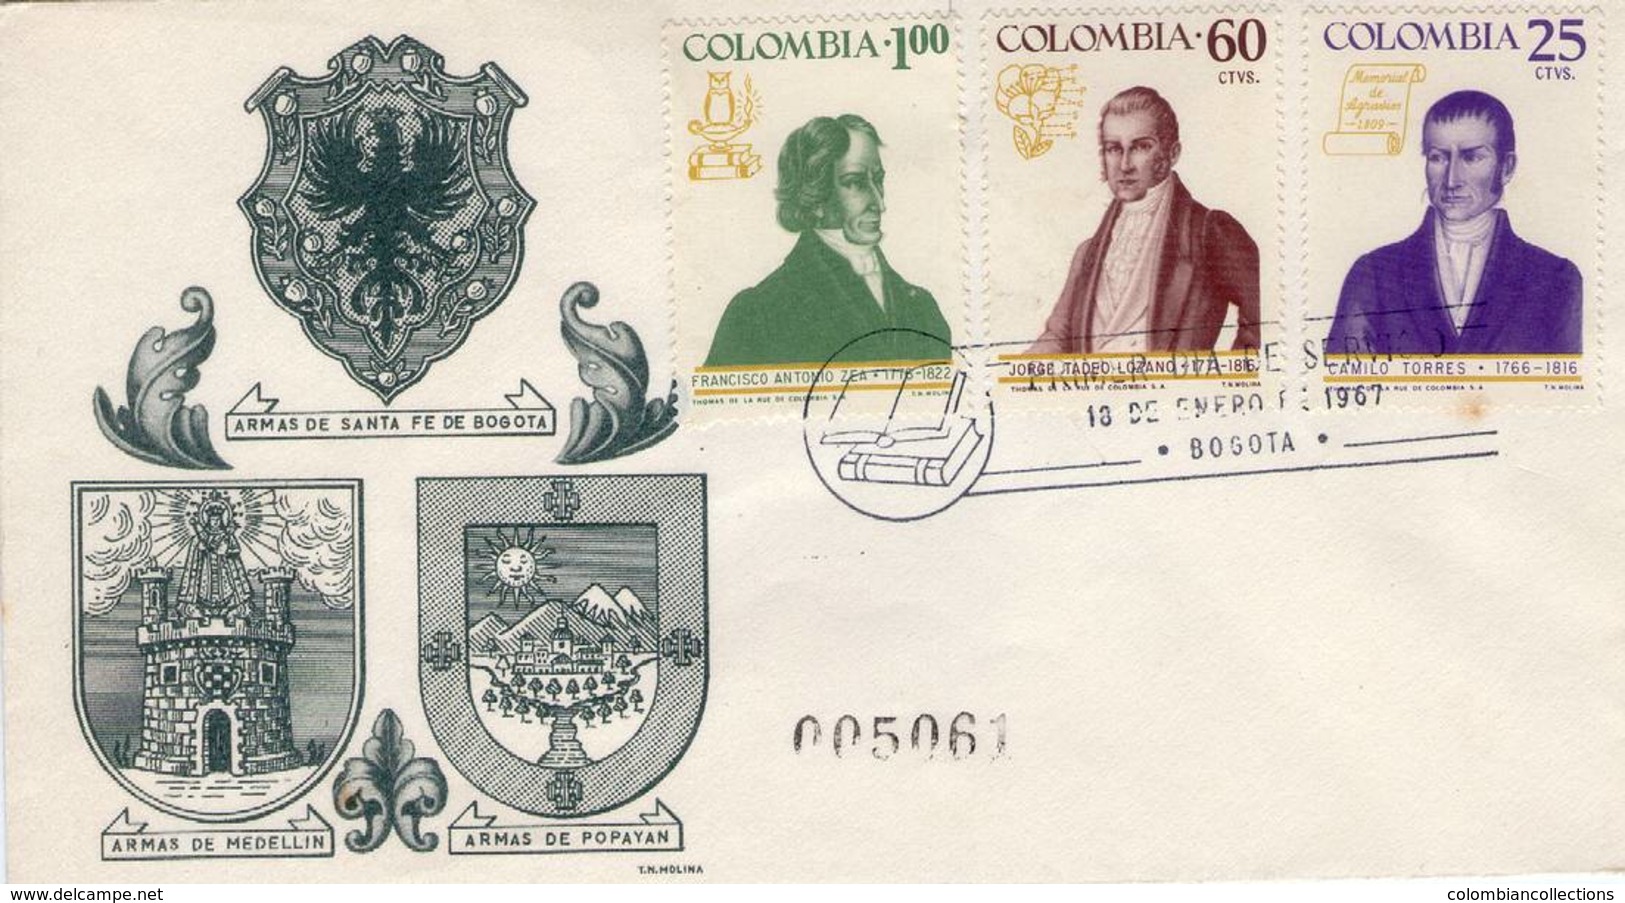 Lote 1133-2-0F, Colombia, 1967, SPD-FDC, Personajes Colombianos, Zea, Tadeo,Camilo Personages, Coat Of Arms, Owl - Colombia